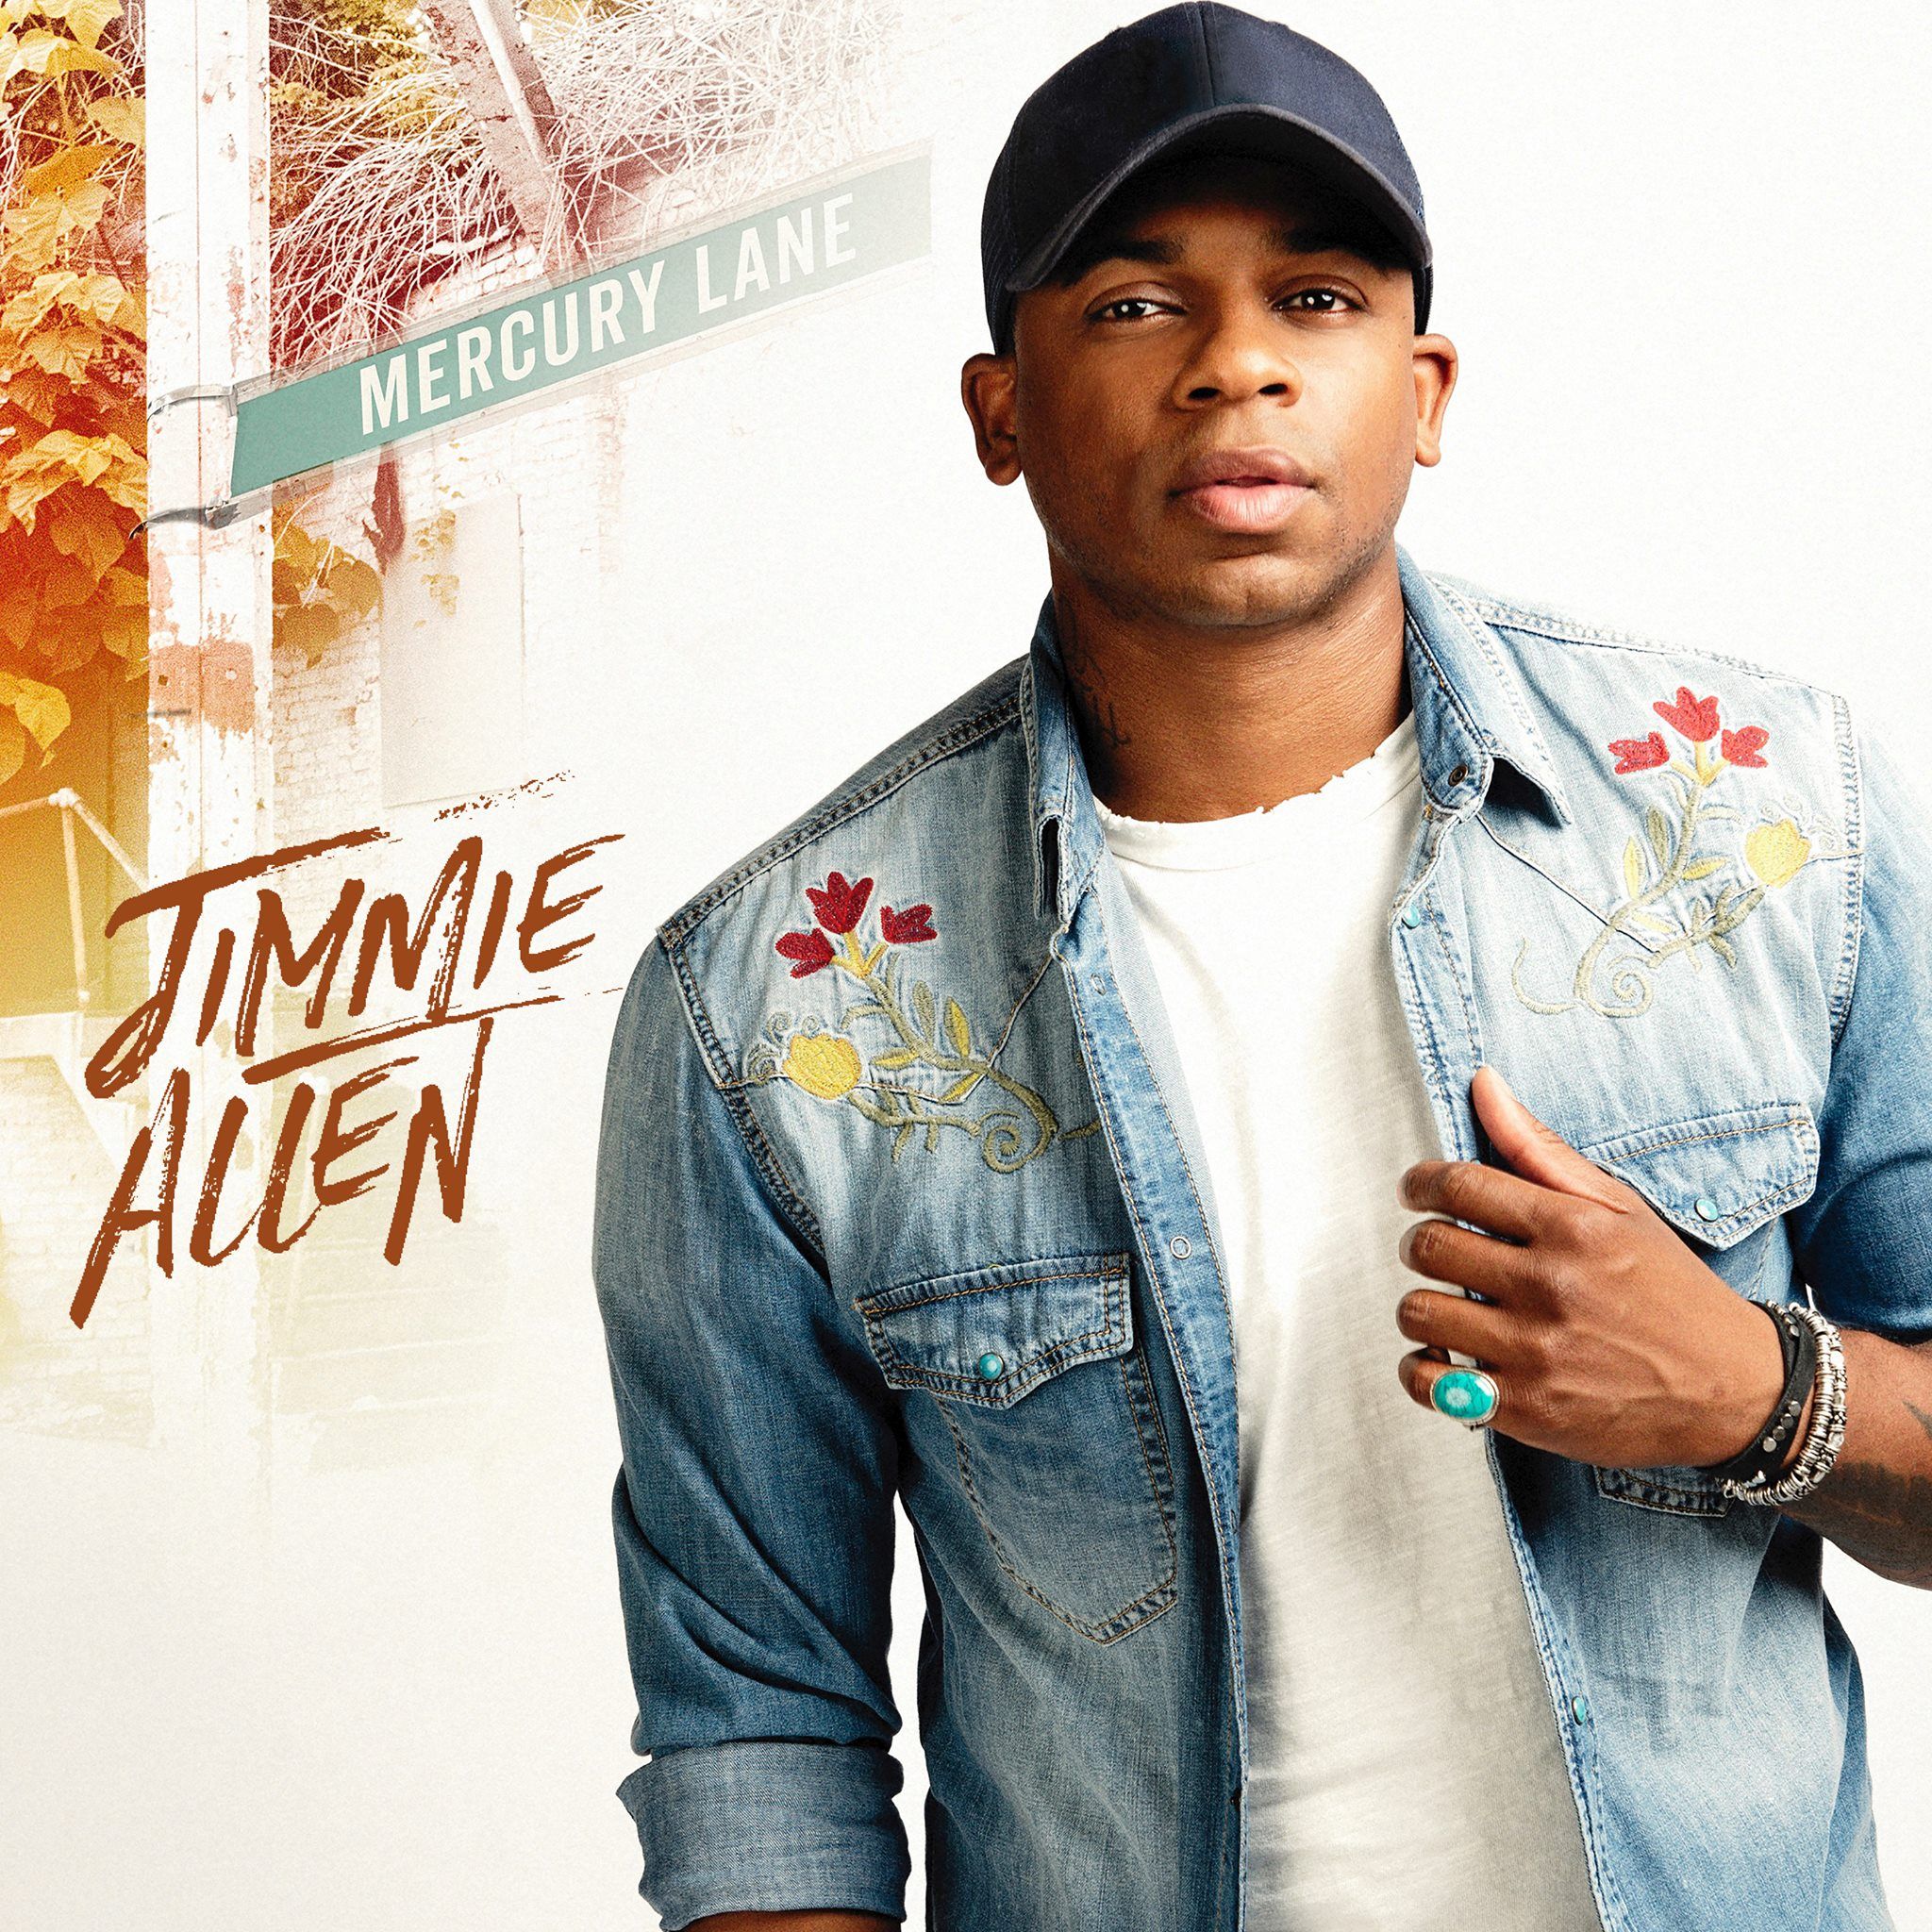 Jimmie Allen is a reflection of a new country music world